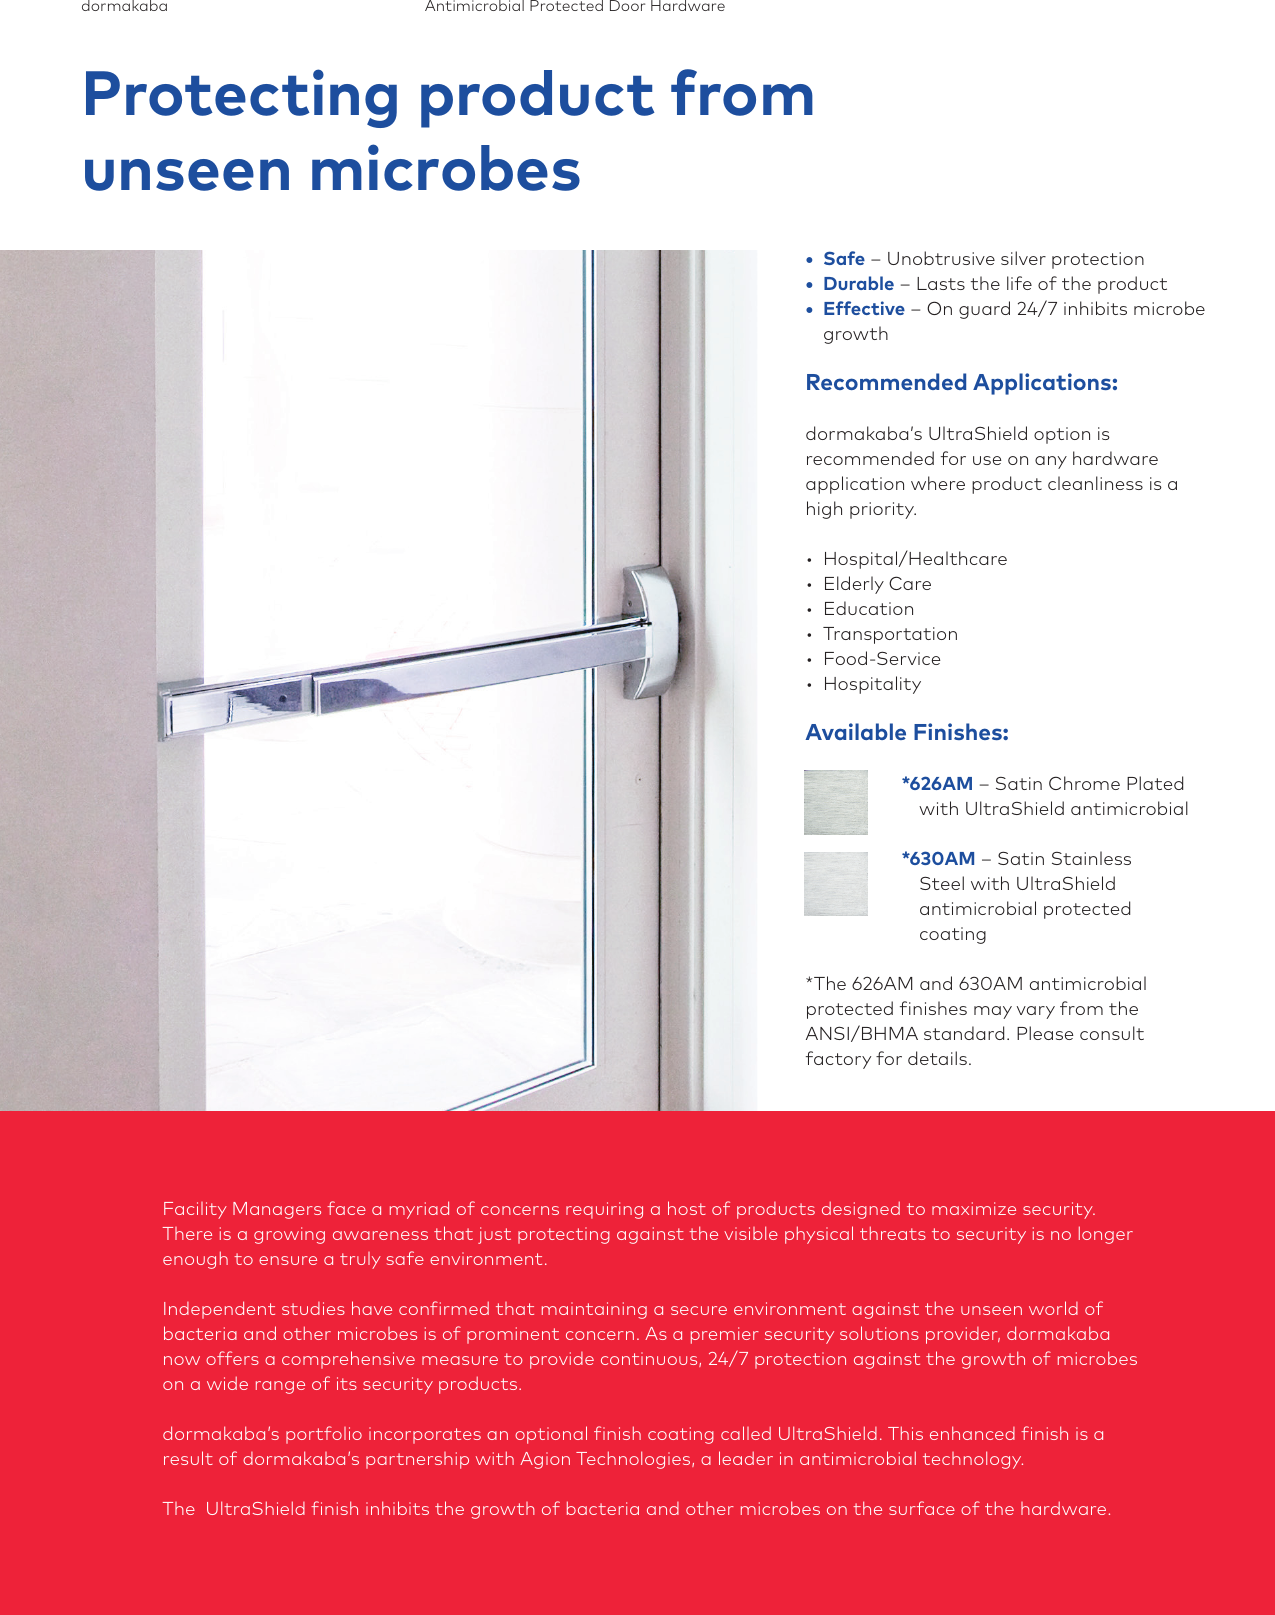 Page 2 of 4 - Dorma  Antimicrobial Protected Door Hardware Brochure Dormakaba-antimicrobial-protected-door-hardware-brochure